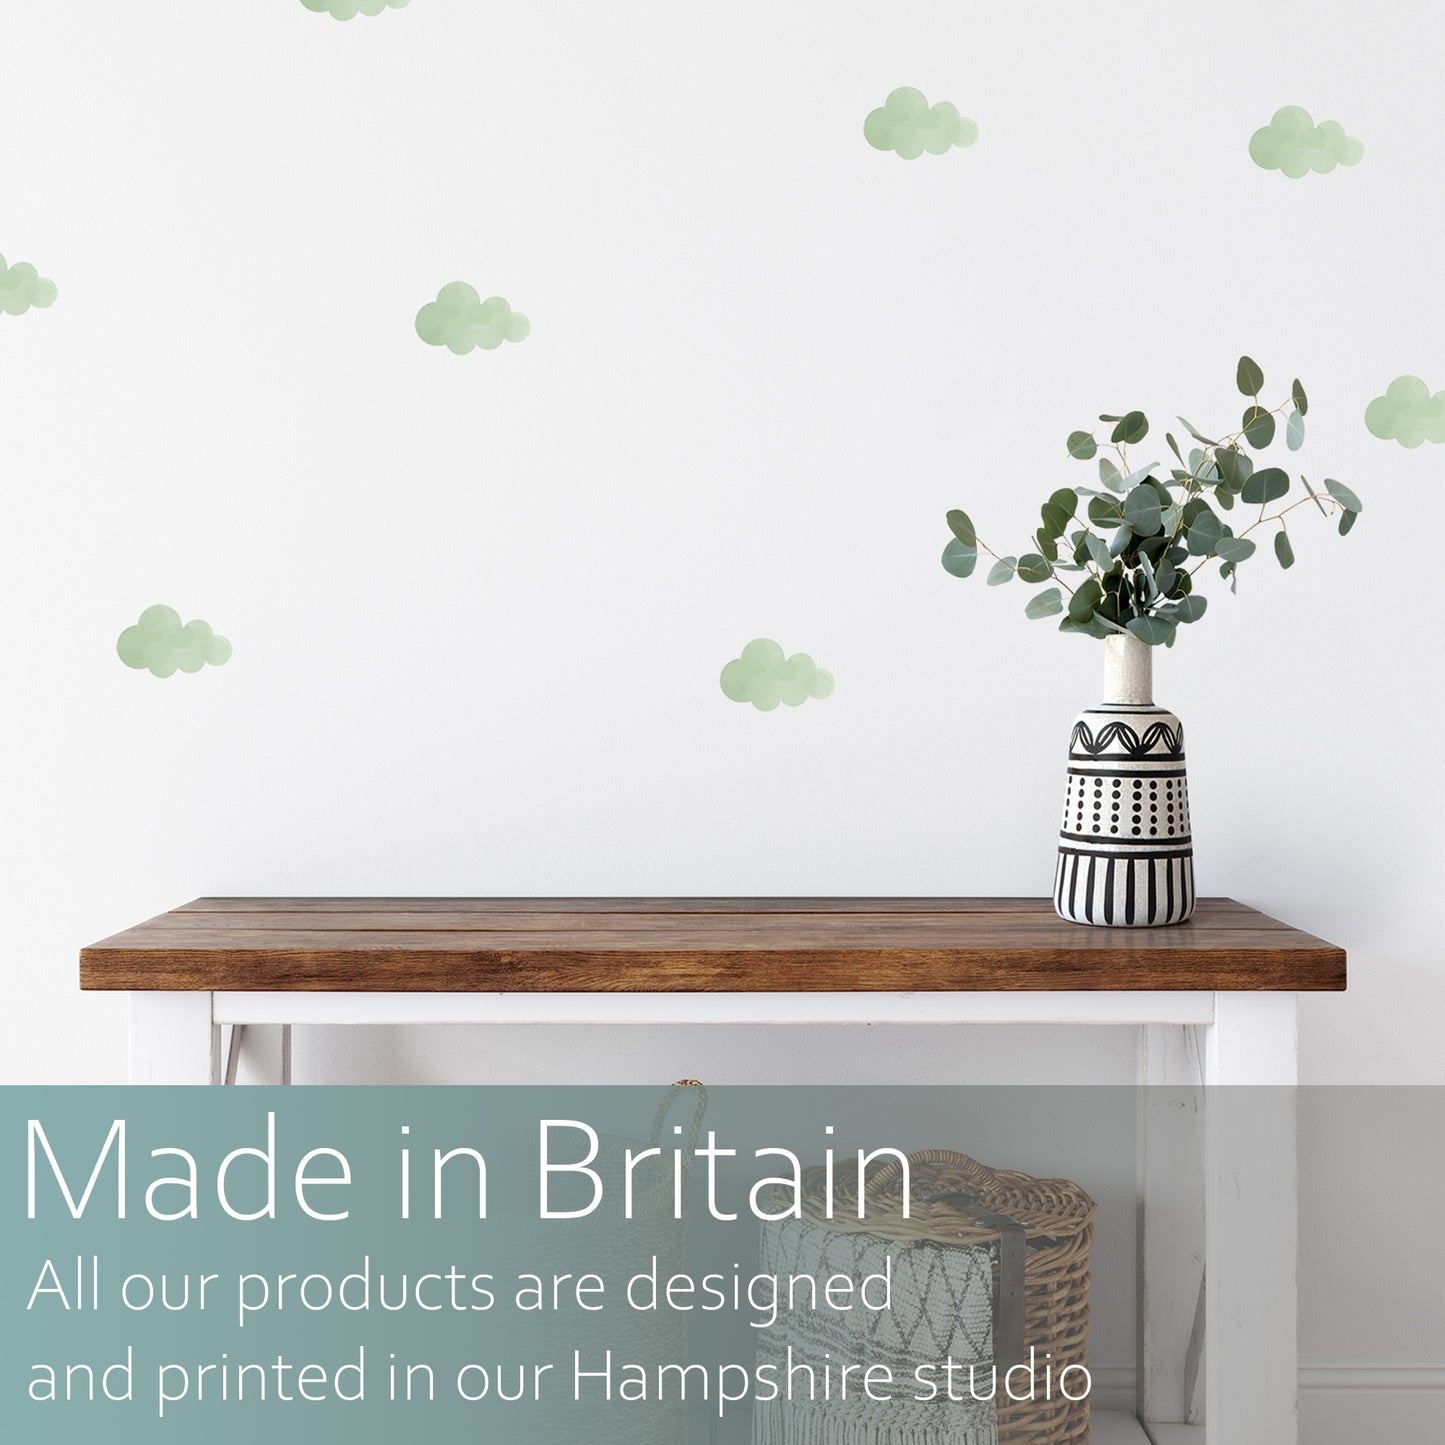 Green clouds | Fabric wall stickers